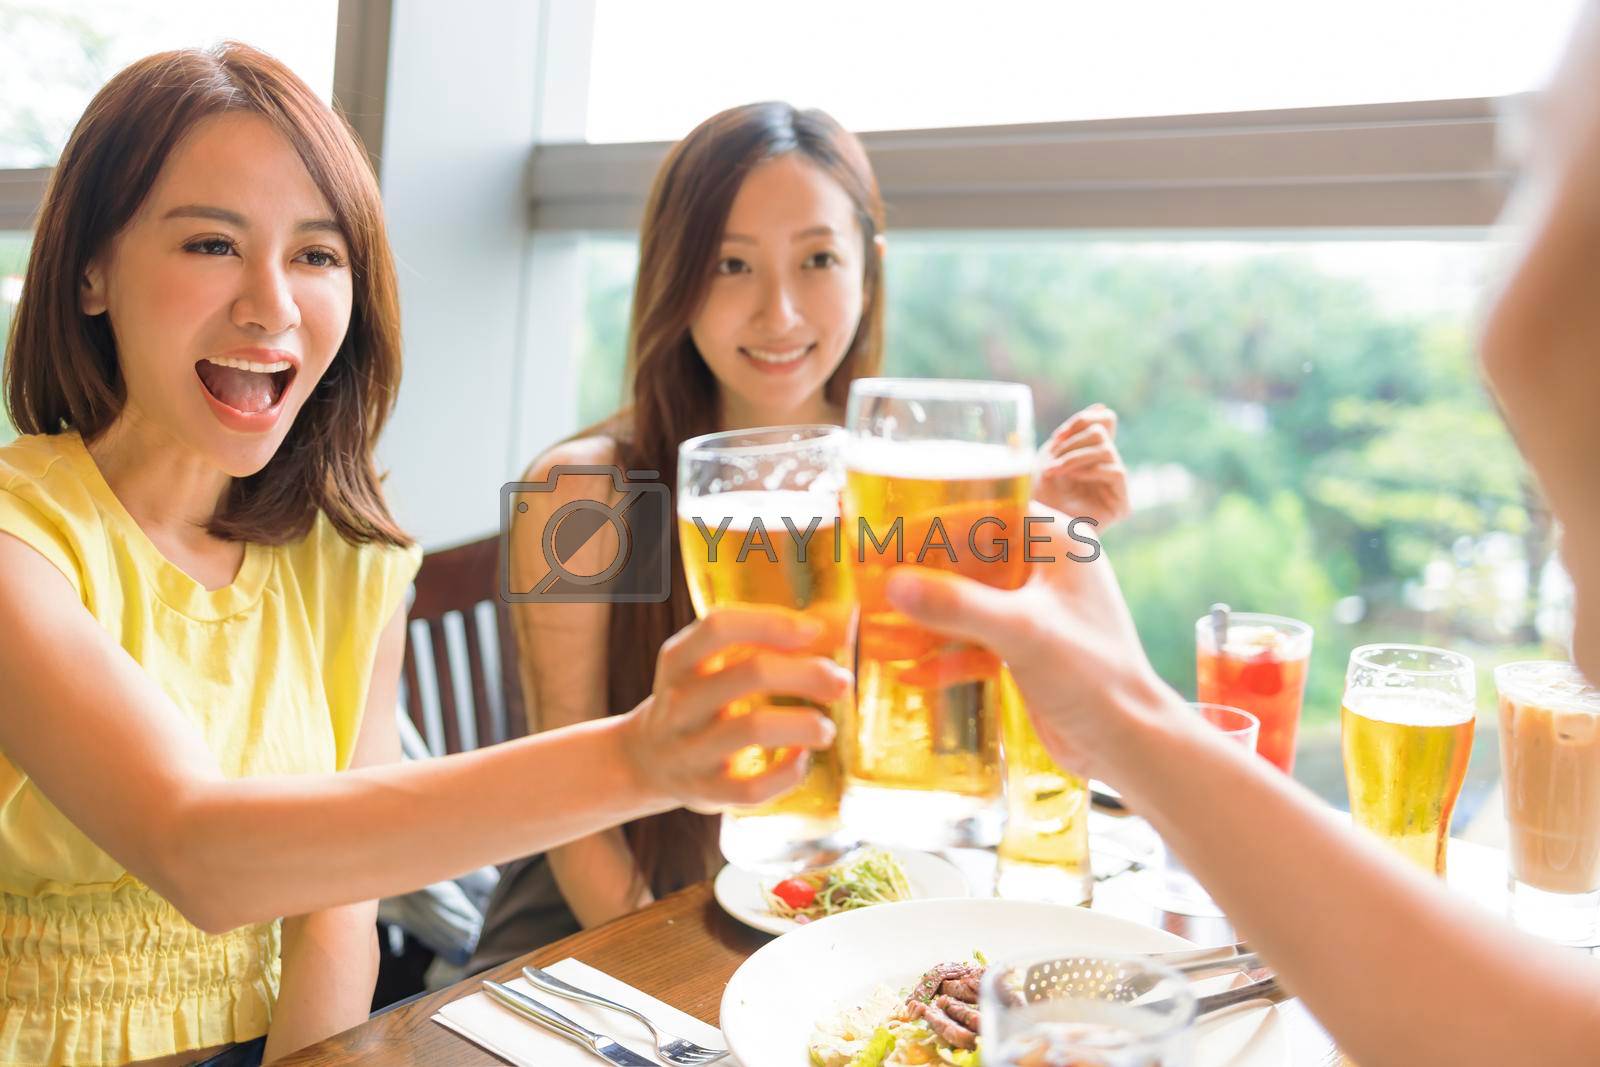 Happy Young group enjoying food and drink in restaurant